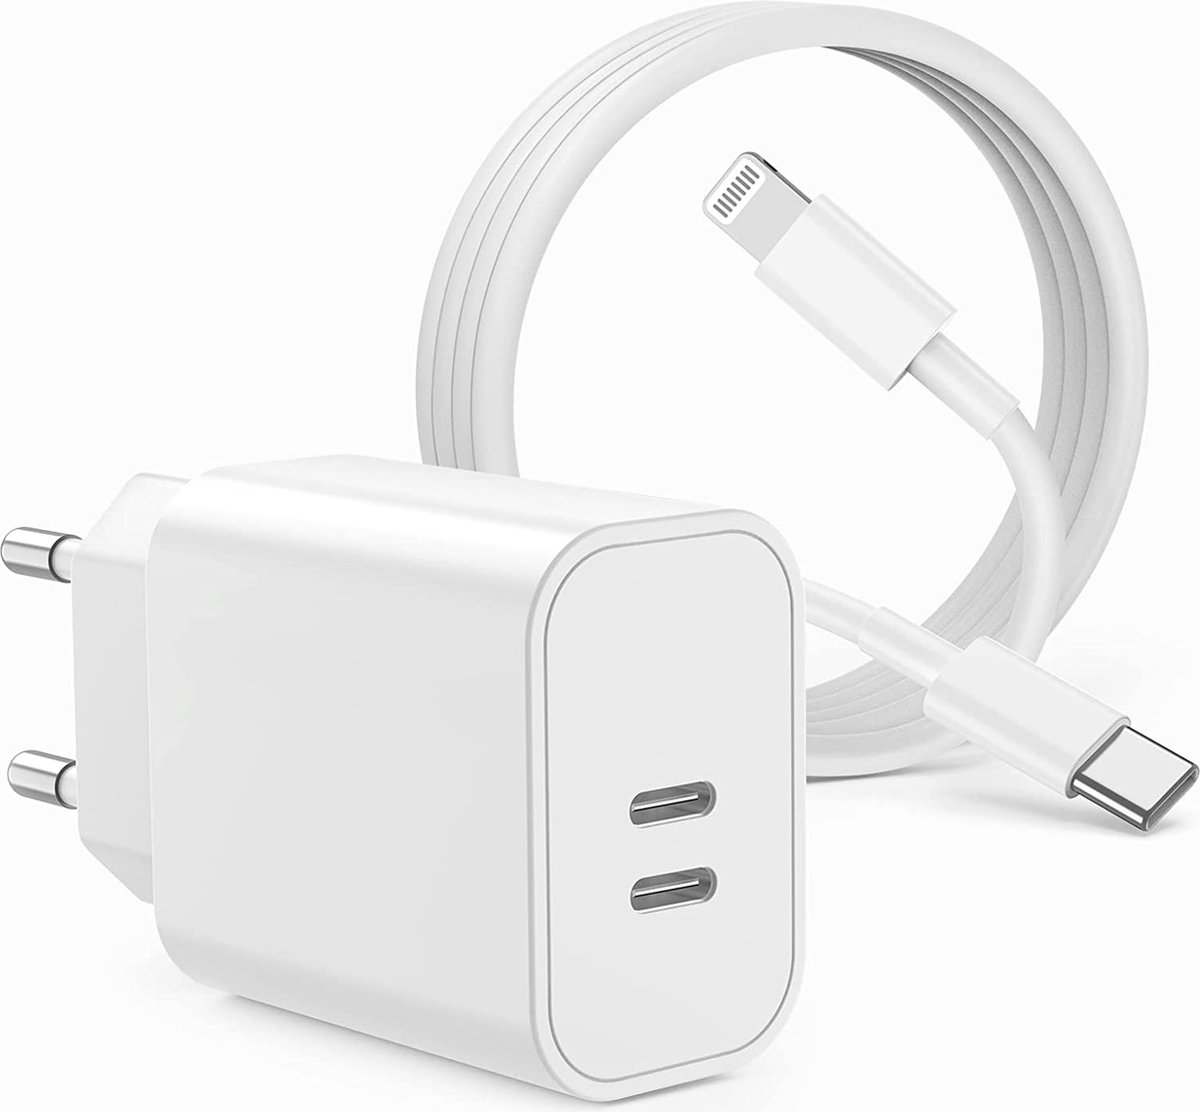 Chargeur Iphone 3 ft 1pack Iphone 13 14 Chargeur Charge rapide avec câble  USB C vers Lightning, 20w USB C Chargeur Bloc Long Iphone Chargeur  Compatible W